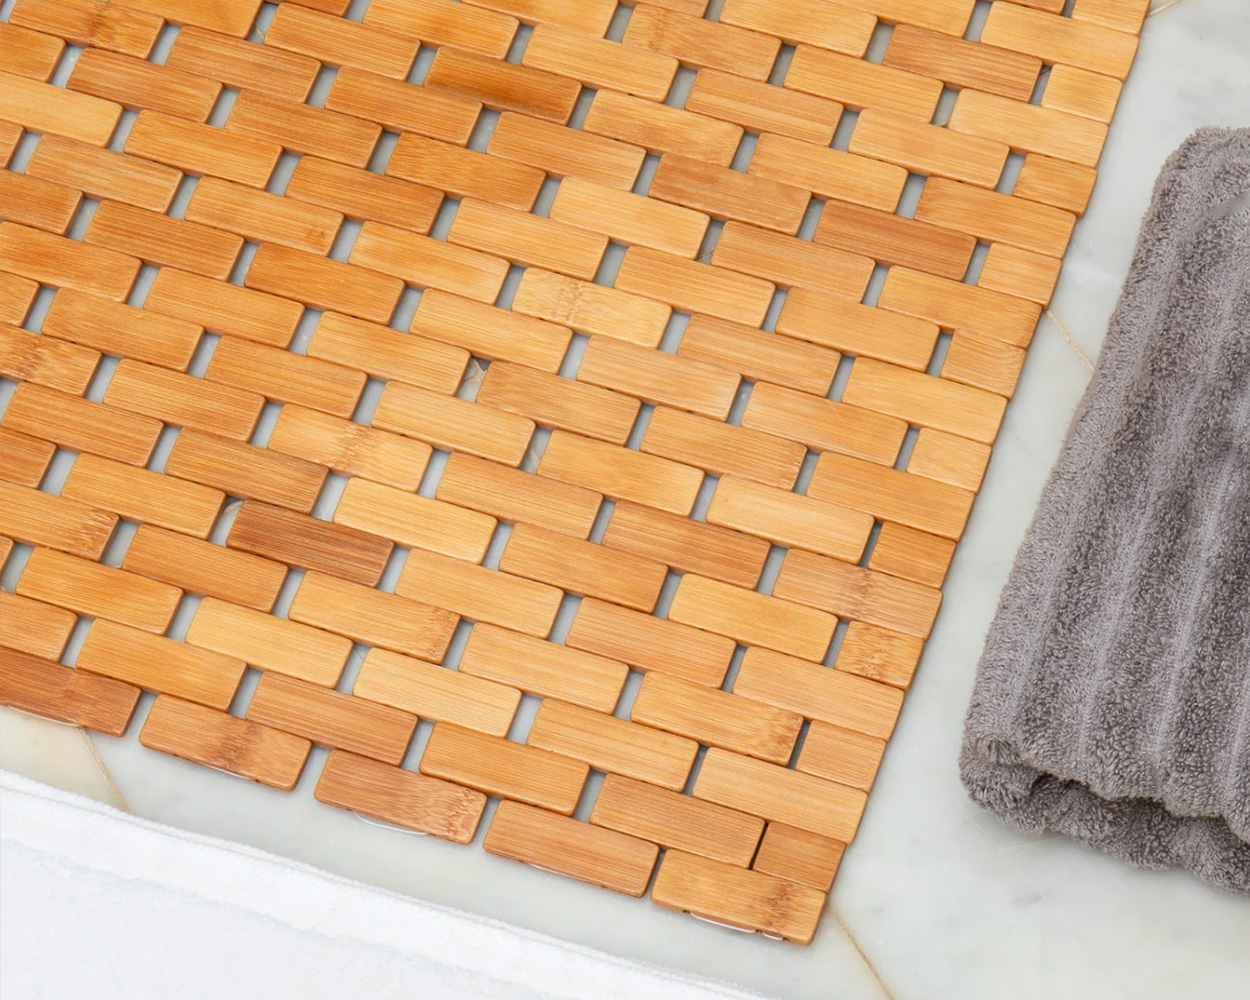 Bamboo bath mat sitting on tile flower next to a grey folded towel.